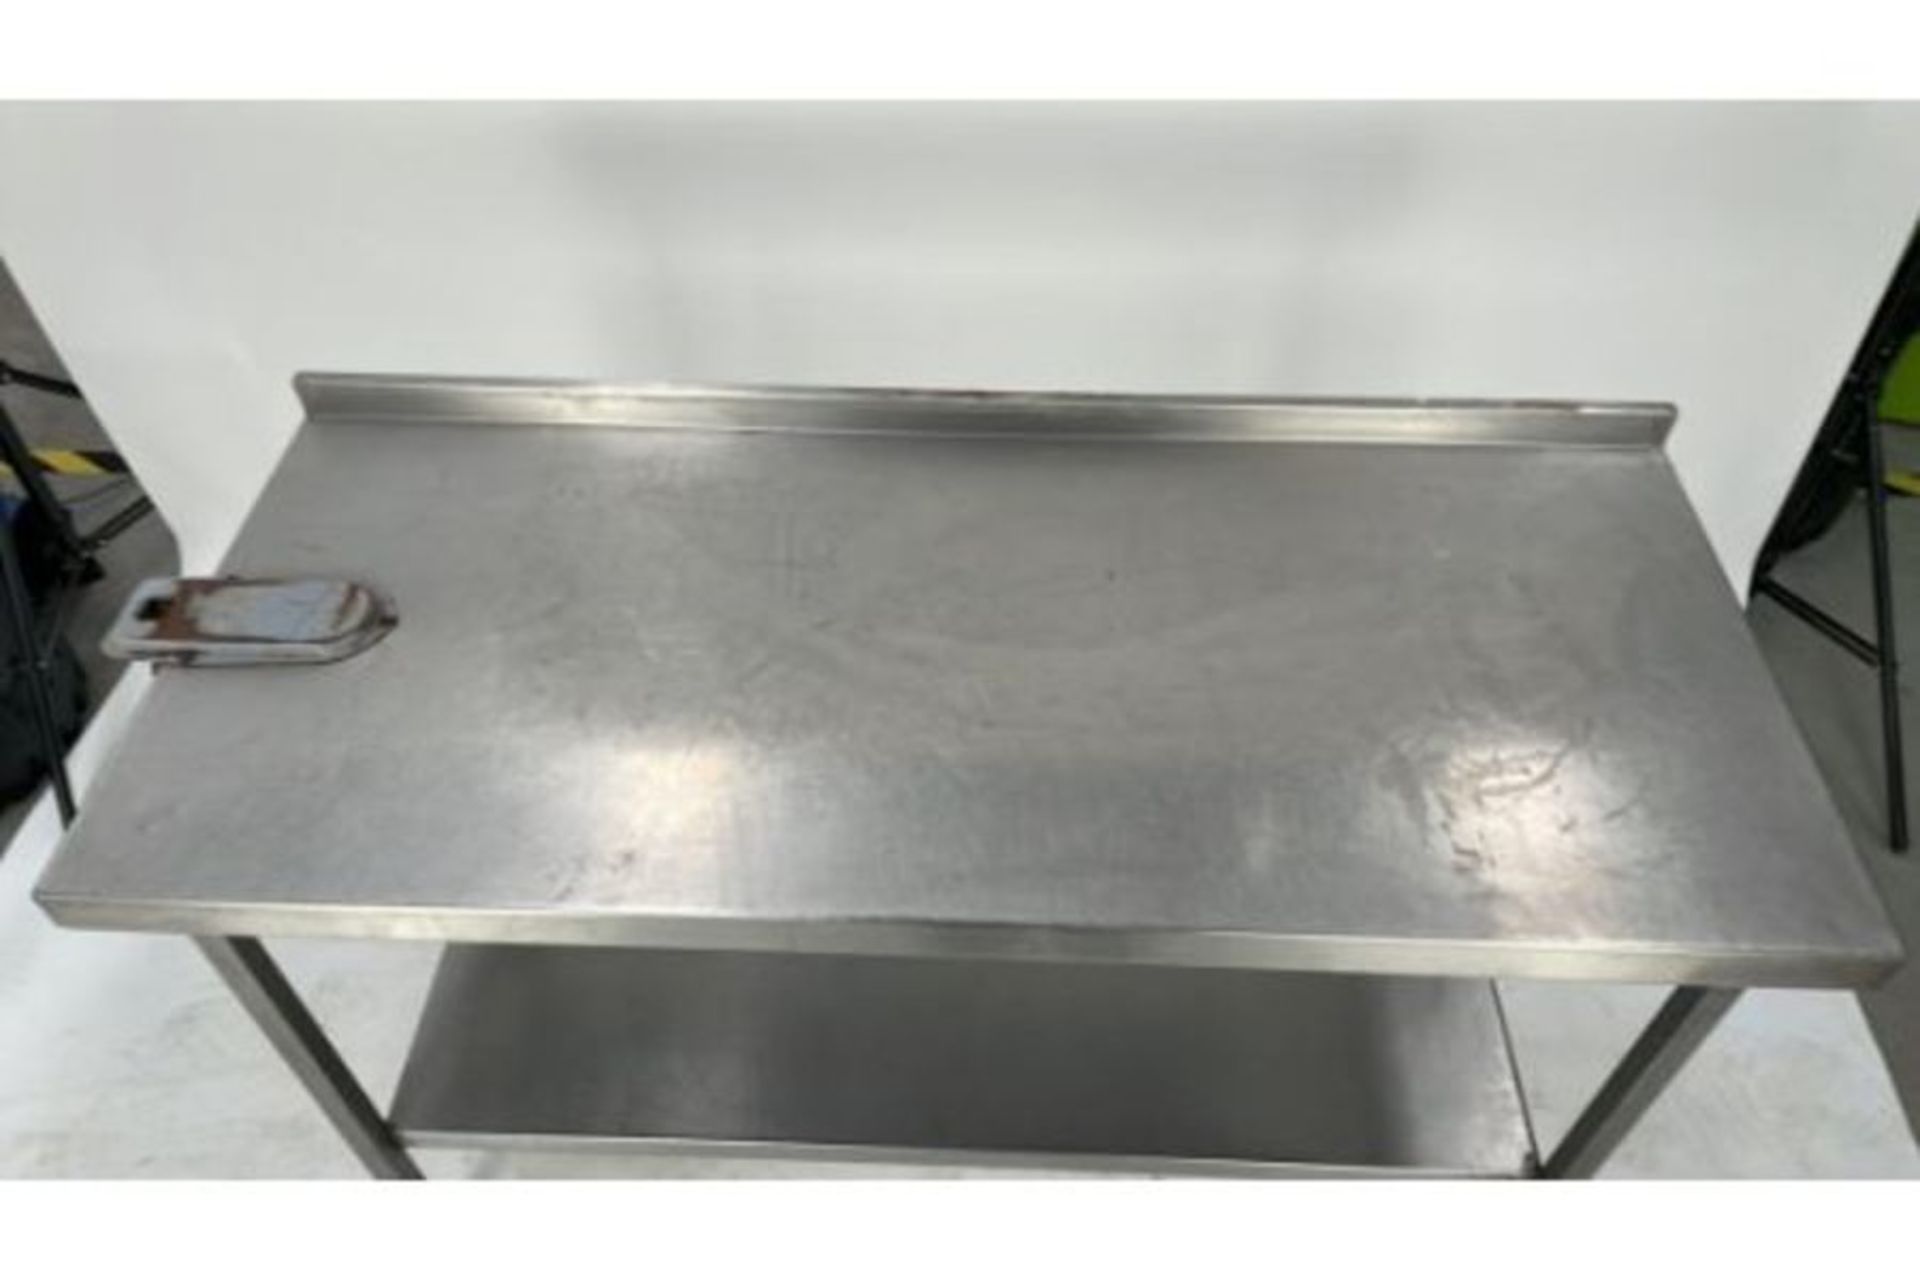 Large Stainless Steel Prep Station. - Image 2 of 3